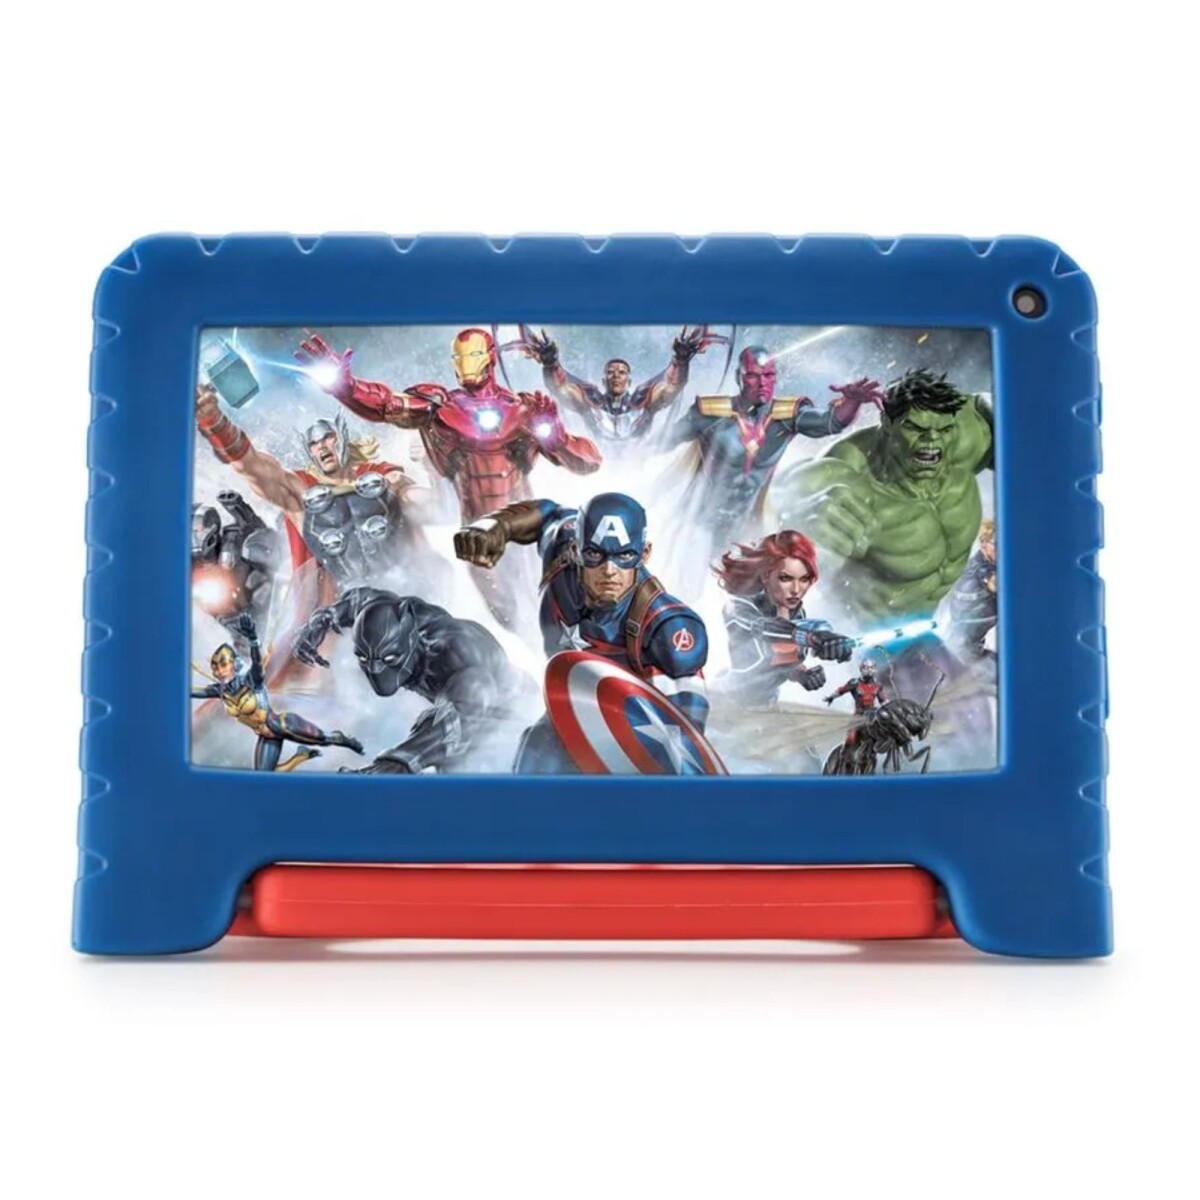 Tablet Multilaser Kid Android QC/32GB/2G/7"/WIFI/Negro Avengers 